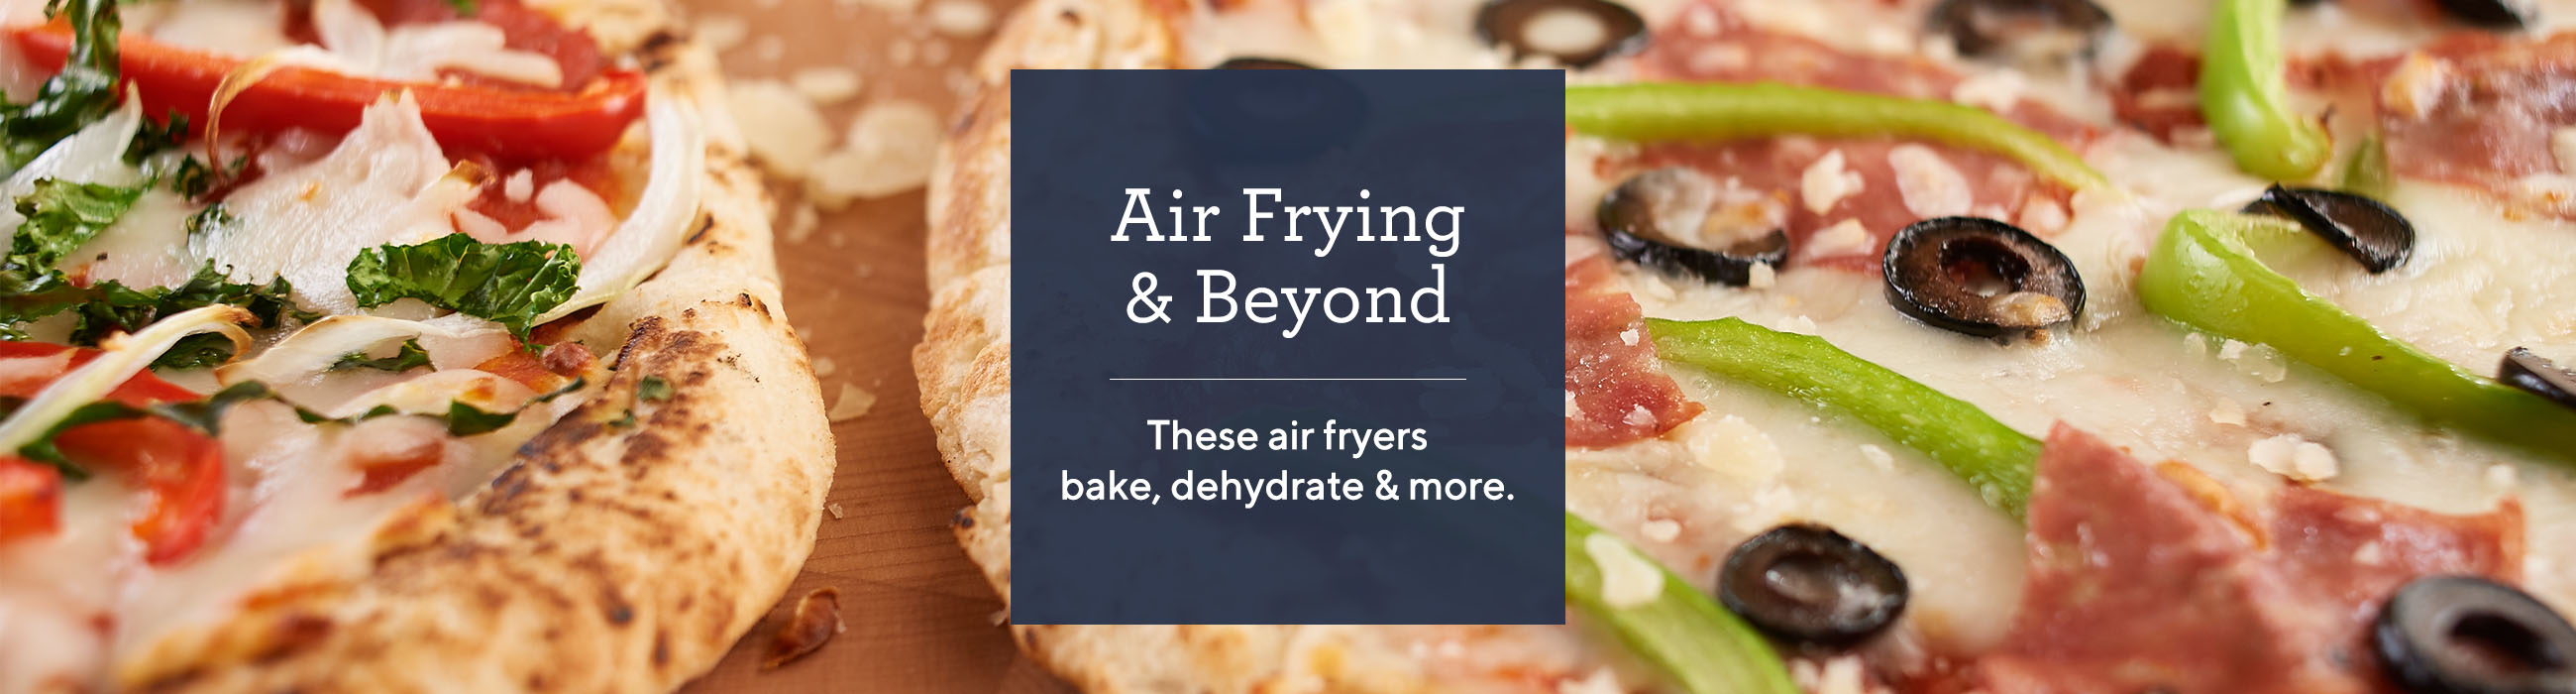 Air Frying & Beyond.  These air fryers bake, dehydrate & more.